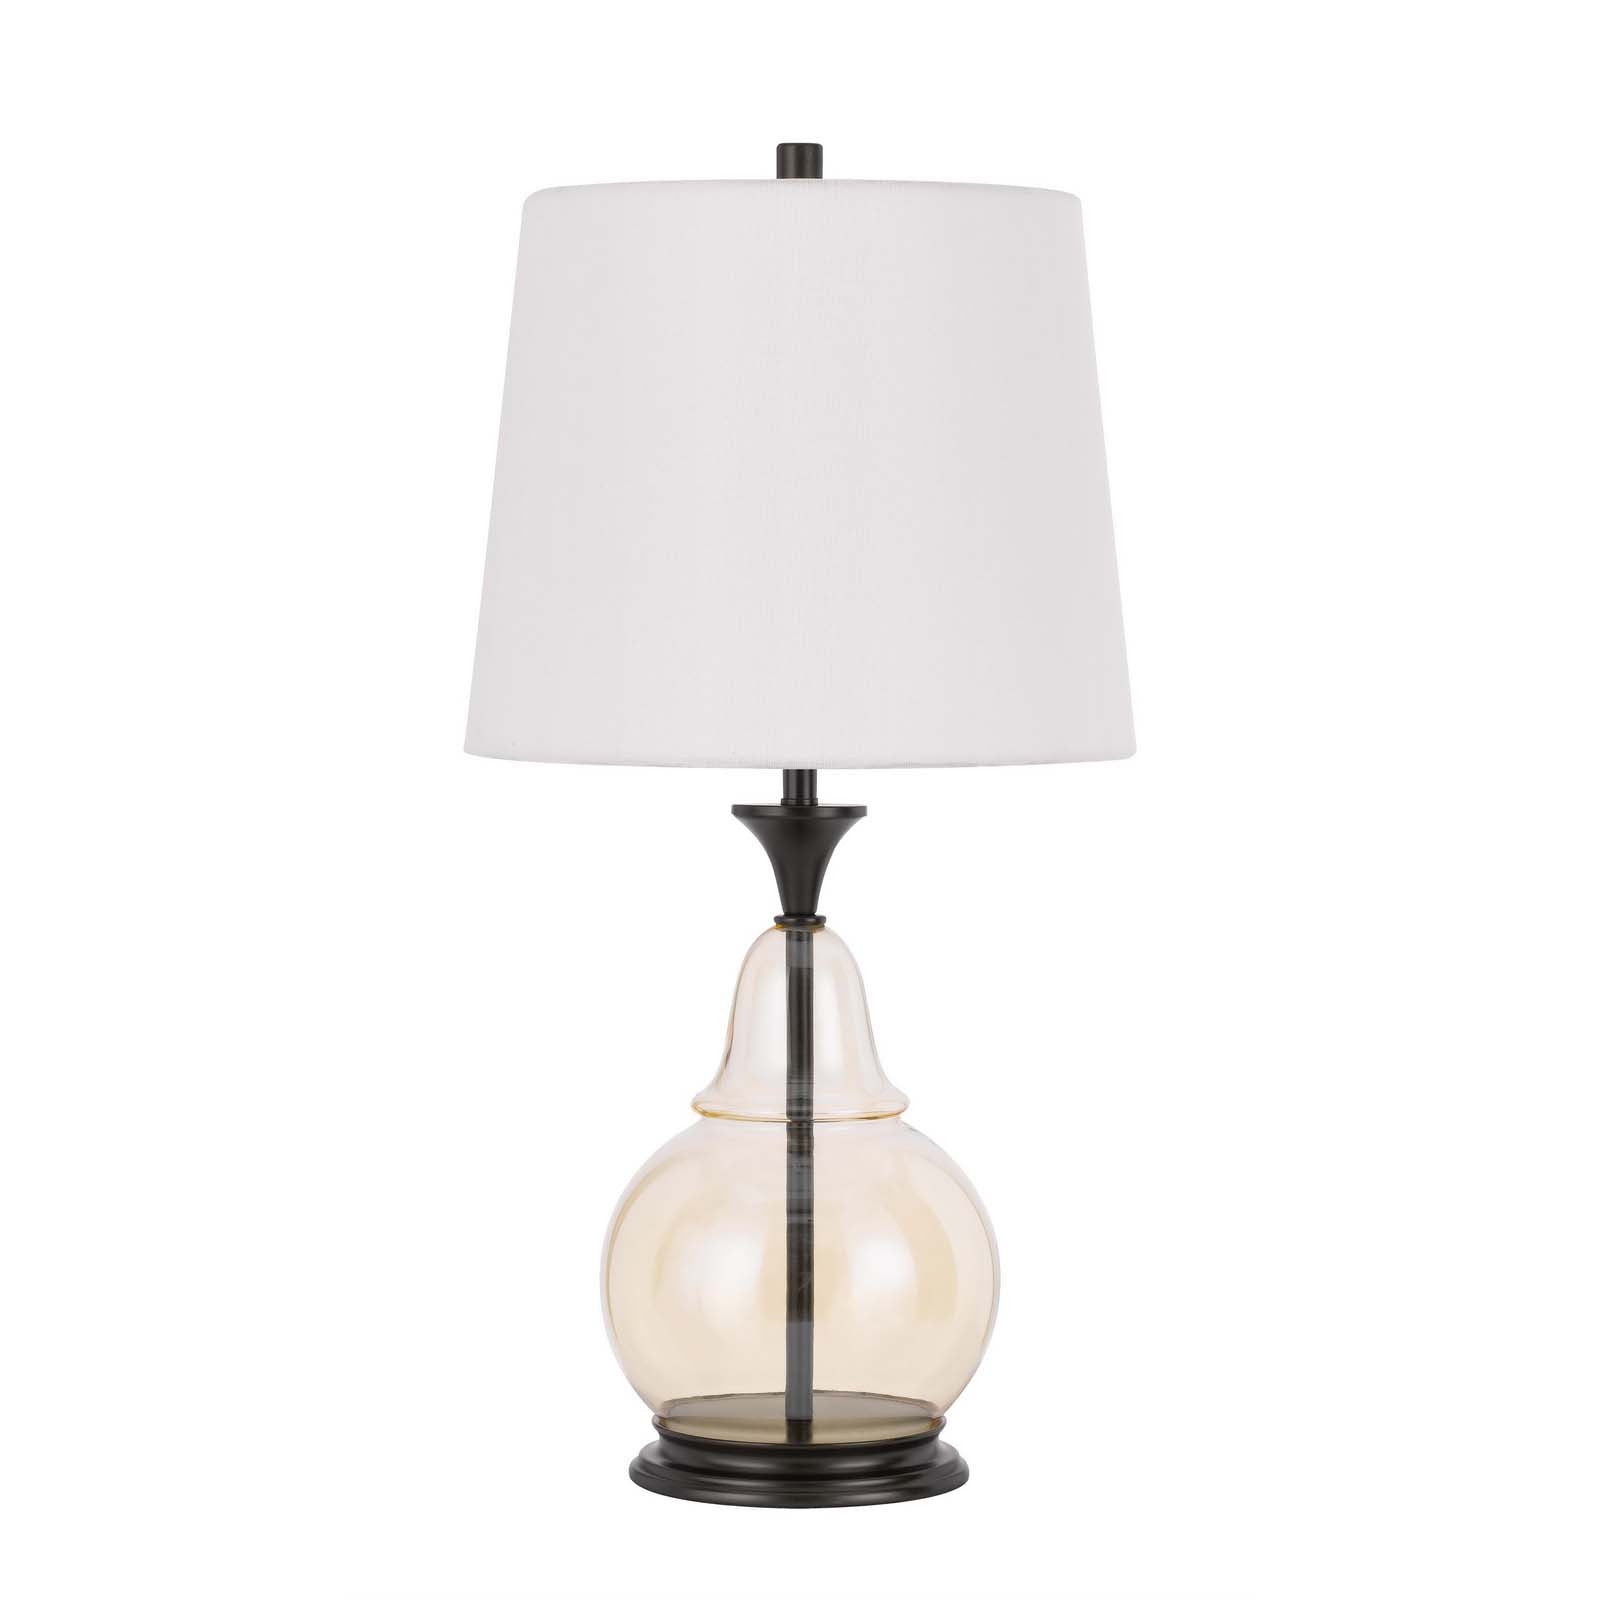 28" Clear Metal Table Lamp With White Empire Shade